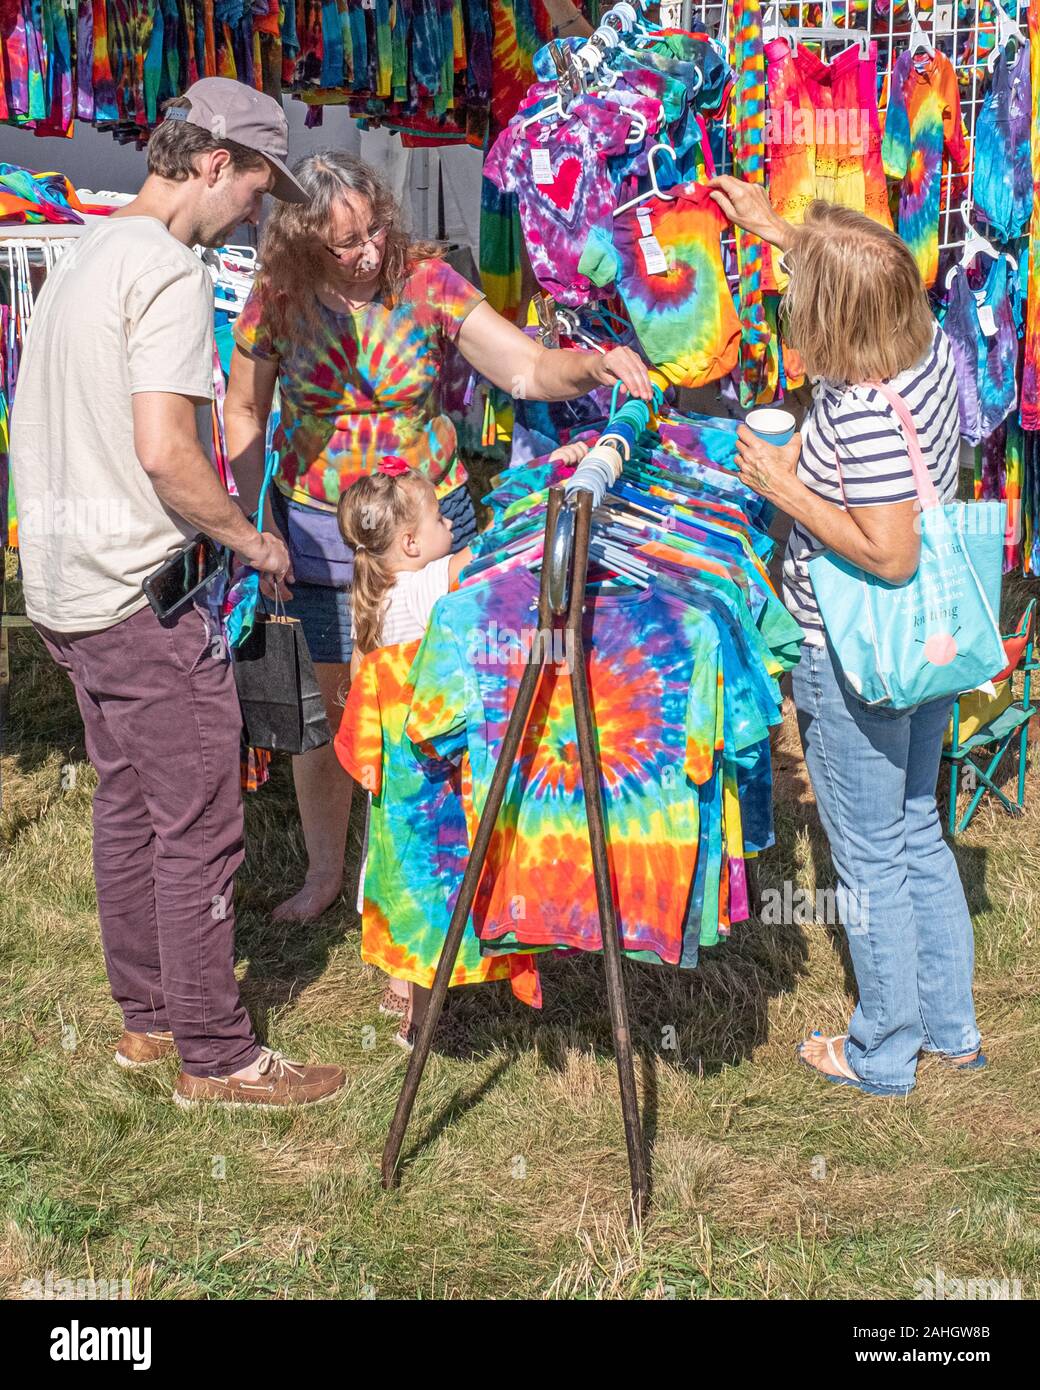 Shopping for clothes at a country fair Stock Photo